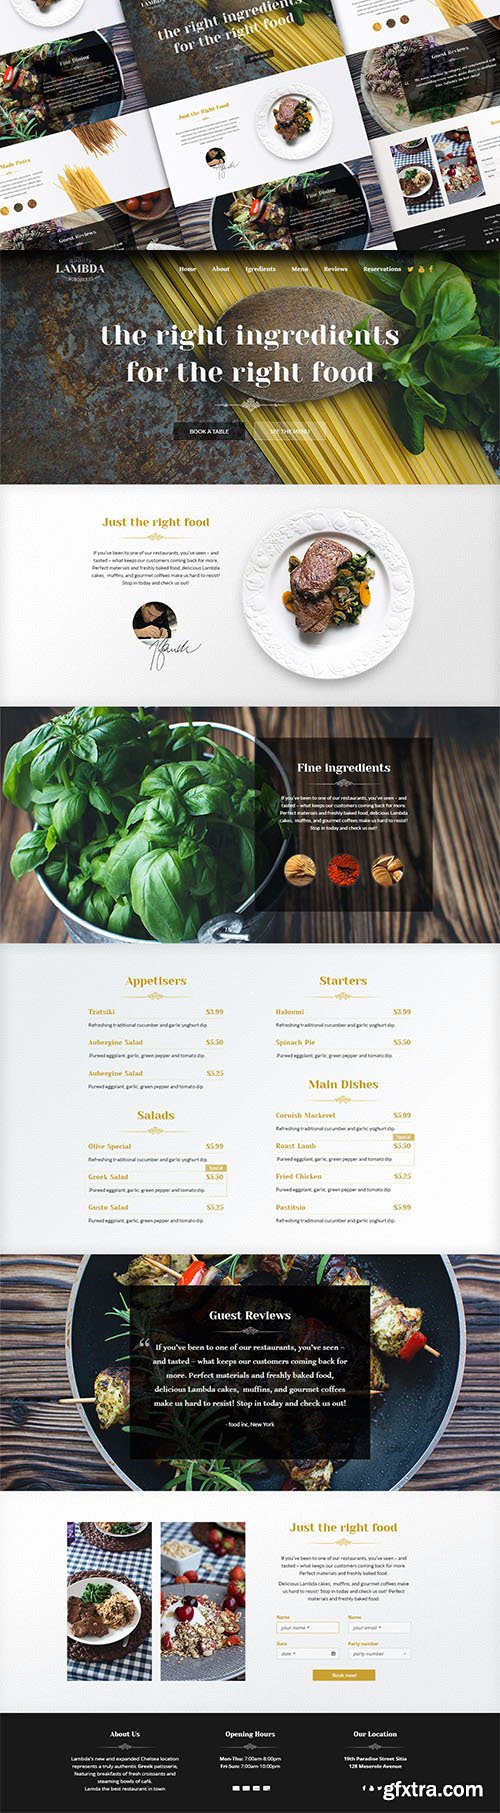 PSD Web Template - Restaurant 2015 - One Page Theme